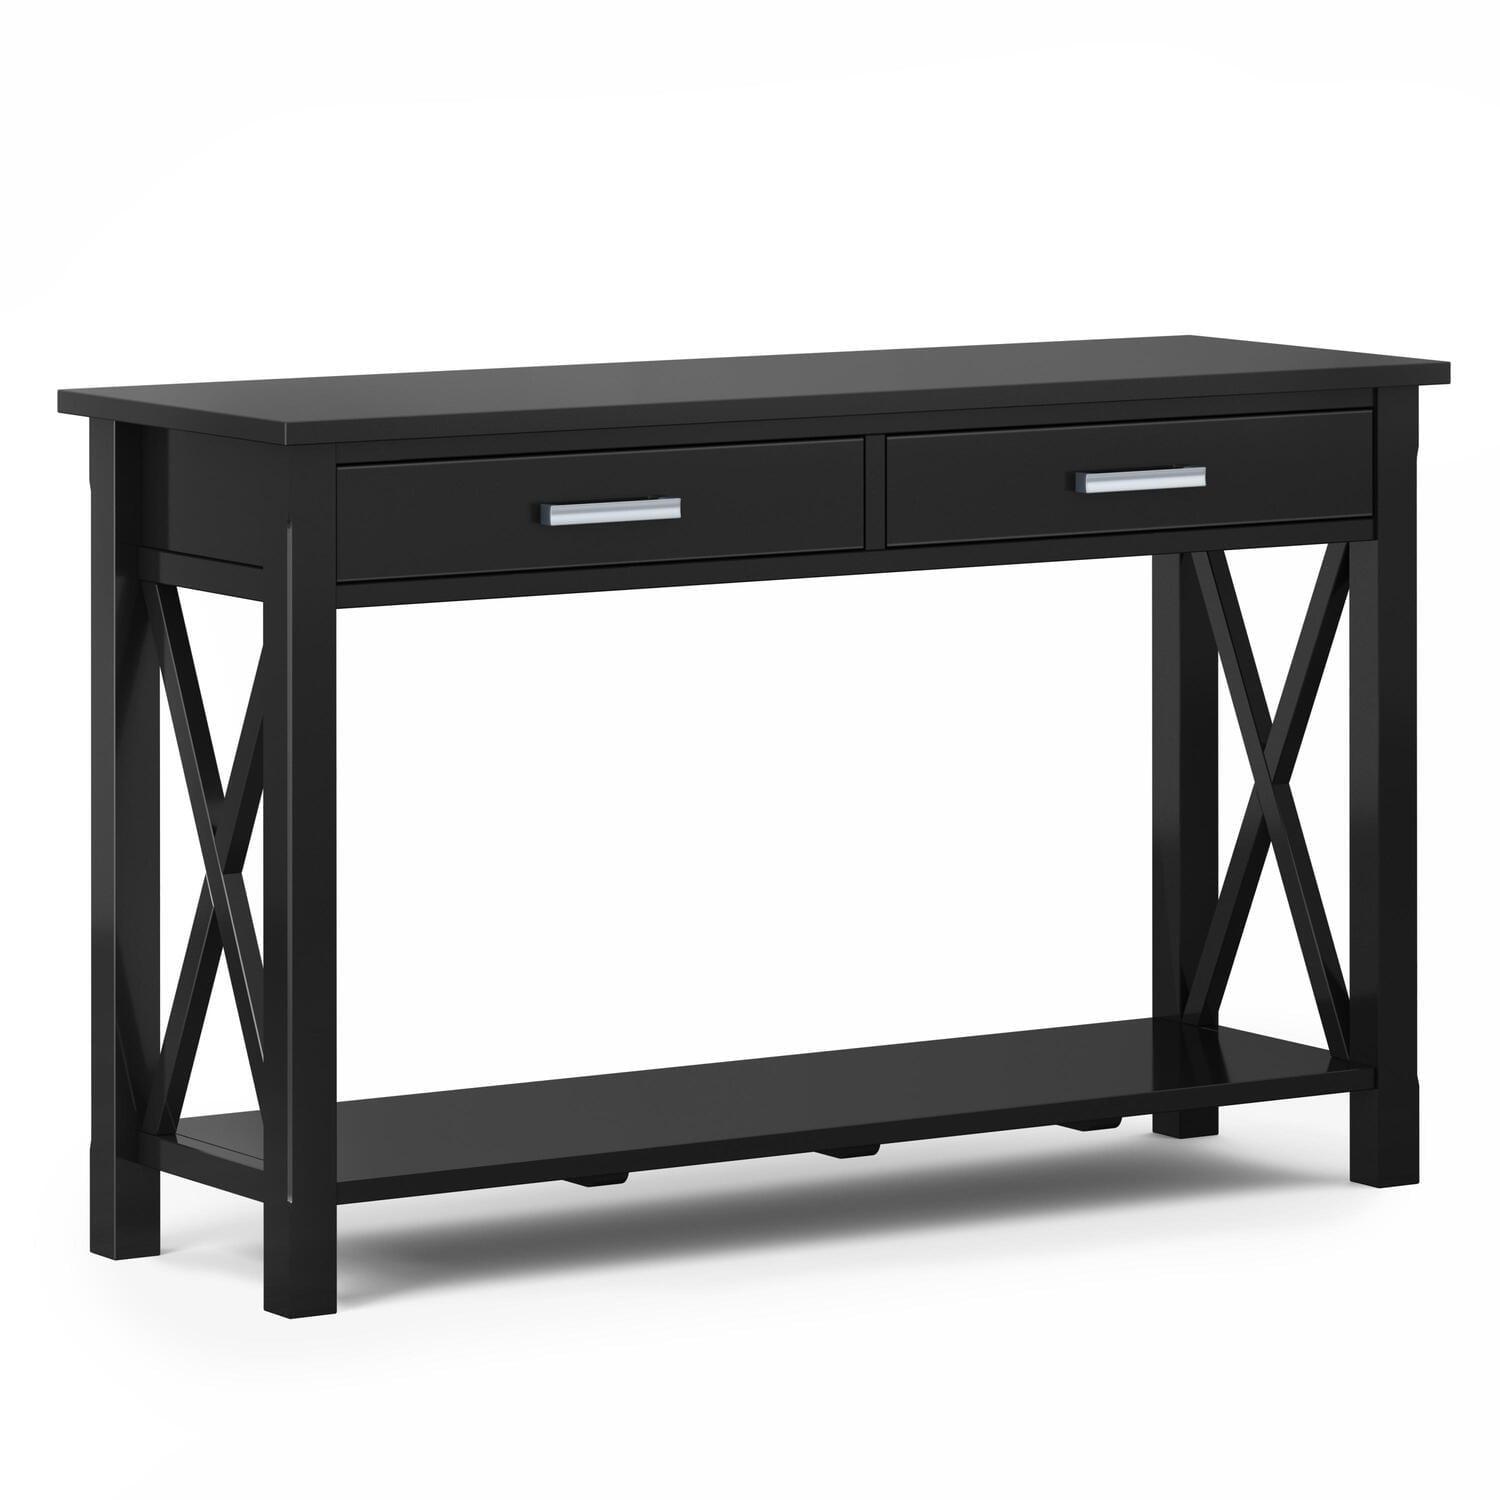 Kitchener Classic Black Pine Console Table with Storage